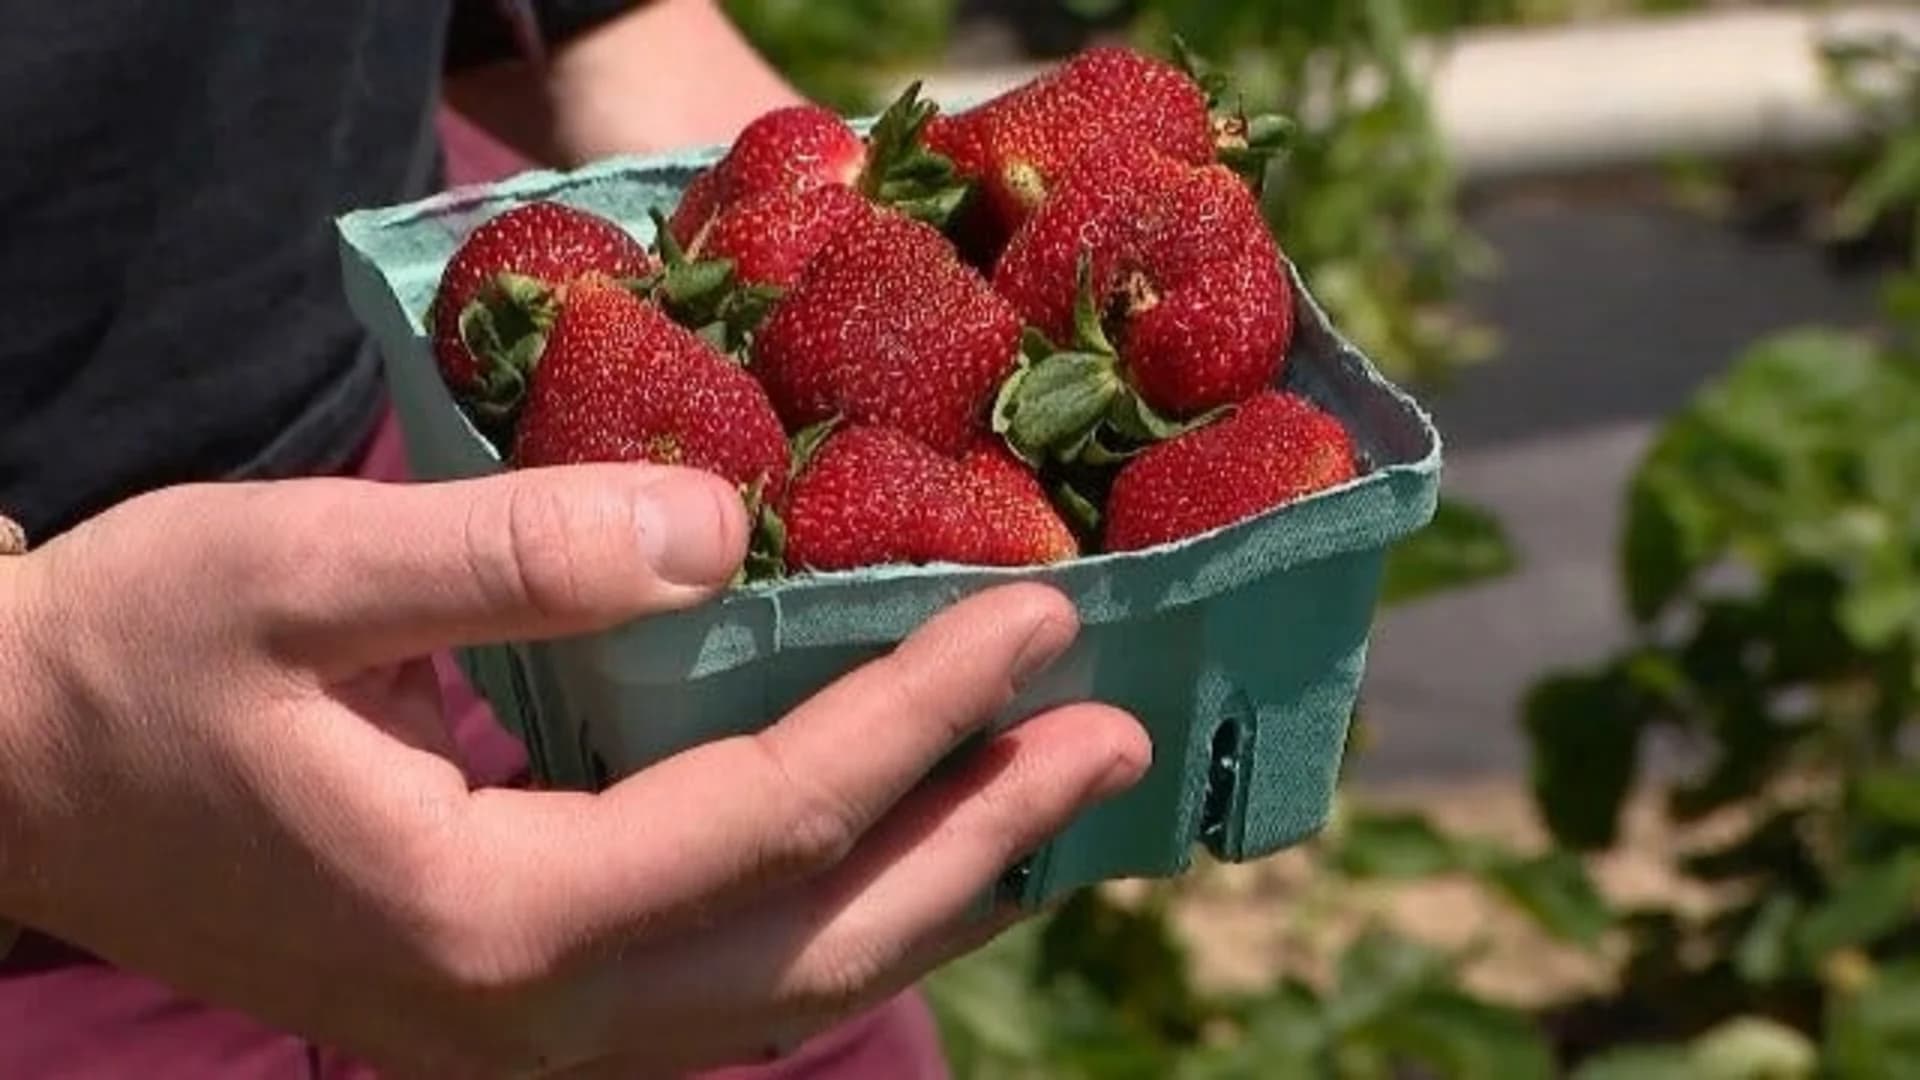 East End: Pick-your-own strawberries